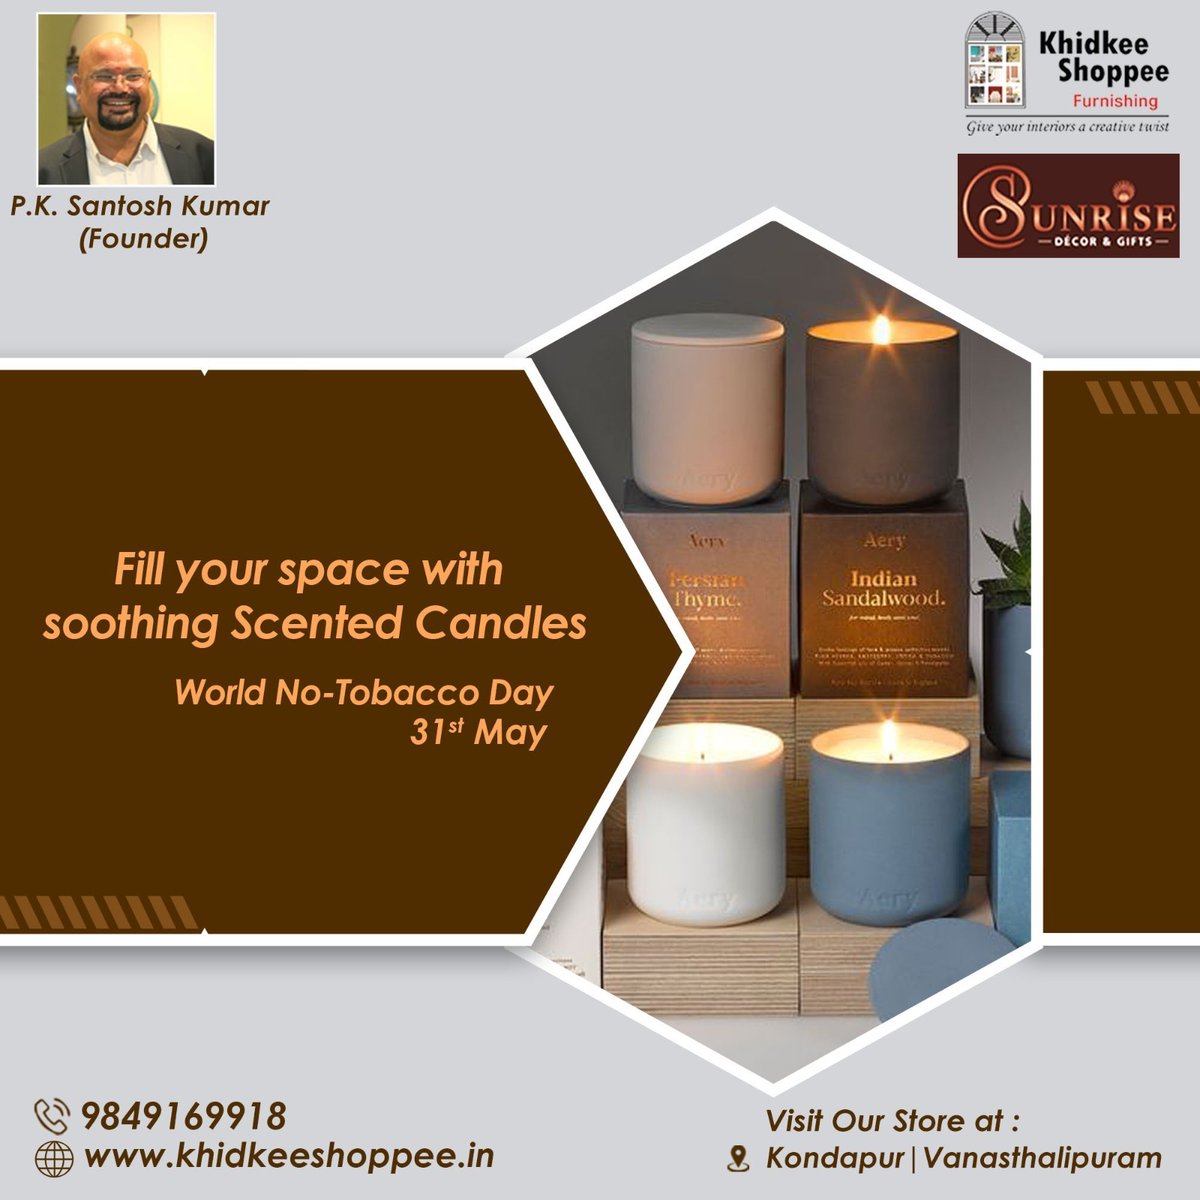 Illuminate Your Space with Soothing Scented Candles from khidkee shoppee on World No Tobacco Day. Say no to tobacco, and yes to relaxation.

#khidkeeshoppee #WorldNoTobaccoDay #WHO #smoking #notobacco #smokefree #healthylifestyle #scentedcandlesindia #scentedcandles #trendingnow